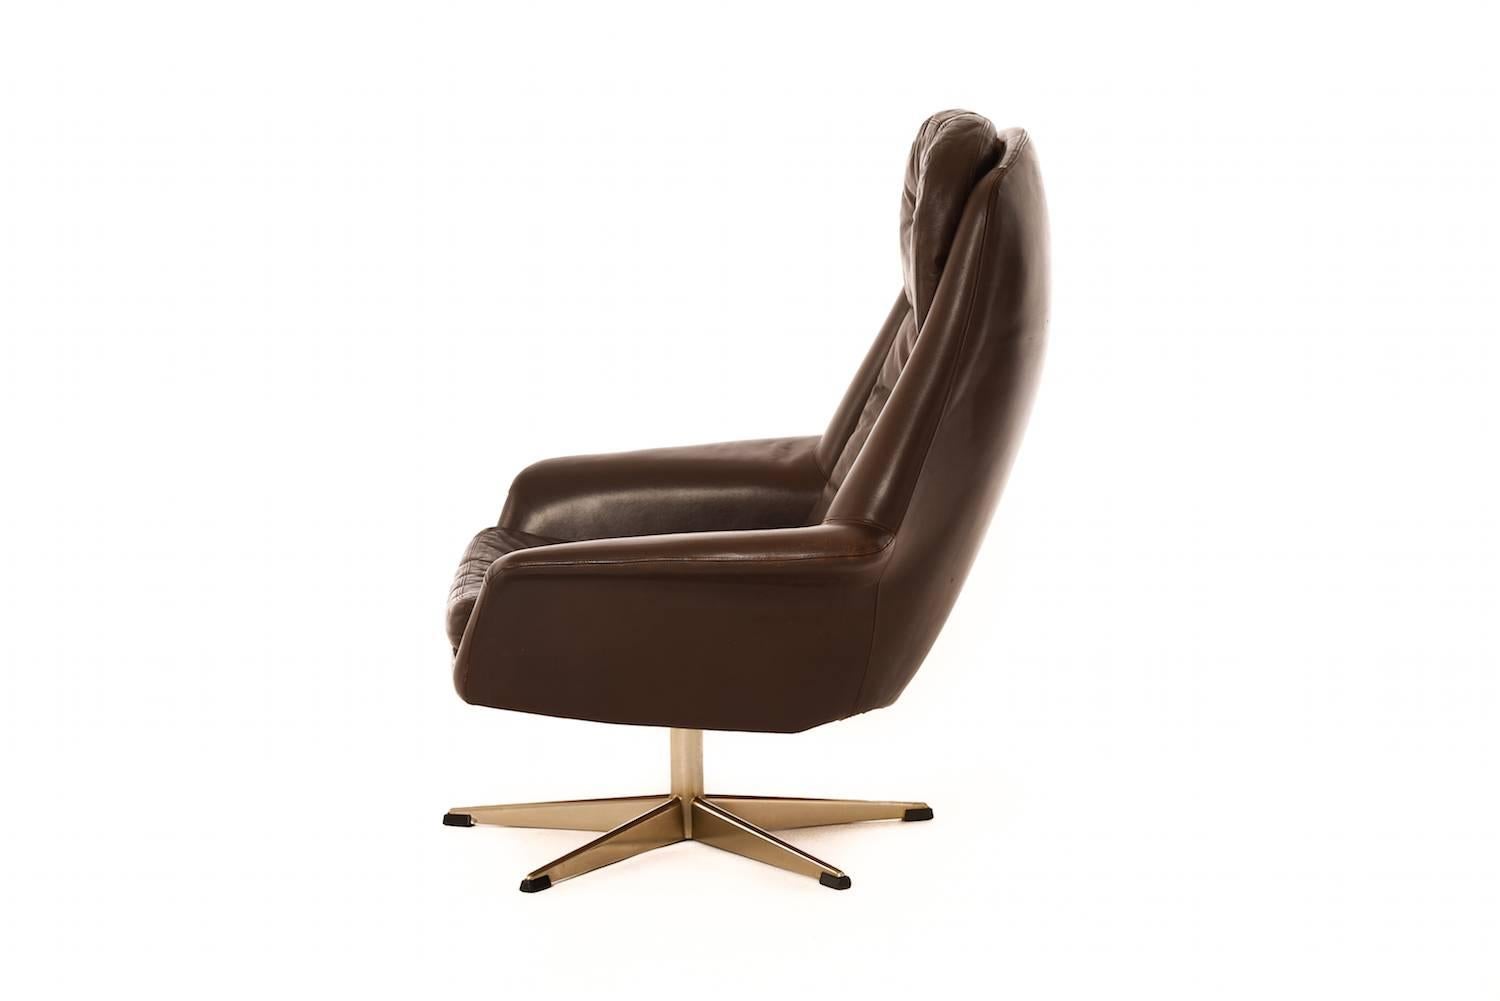 Fabulous leather upholstered easy chair with swiveling chrome base. 

Professional, skilled furniture restoration is an integral part of what we do every day. Our goal is to provide beautiful, functional furniture that honors its illustrious past.